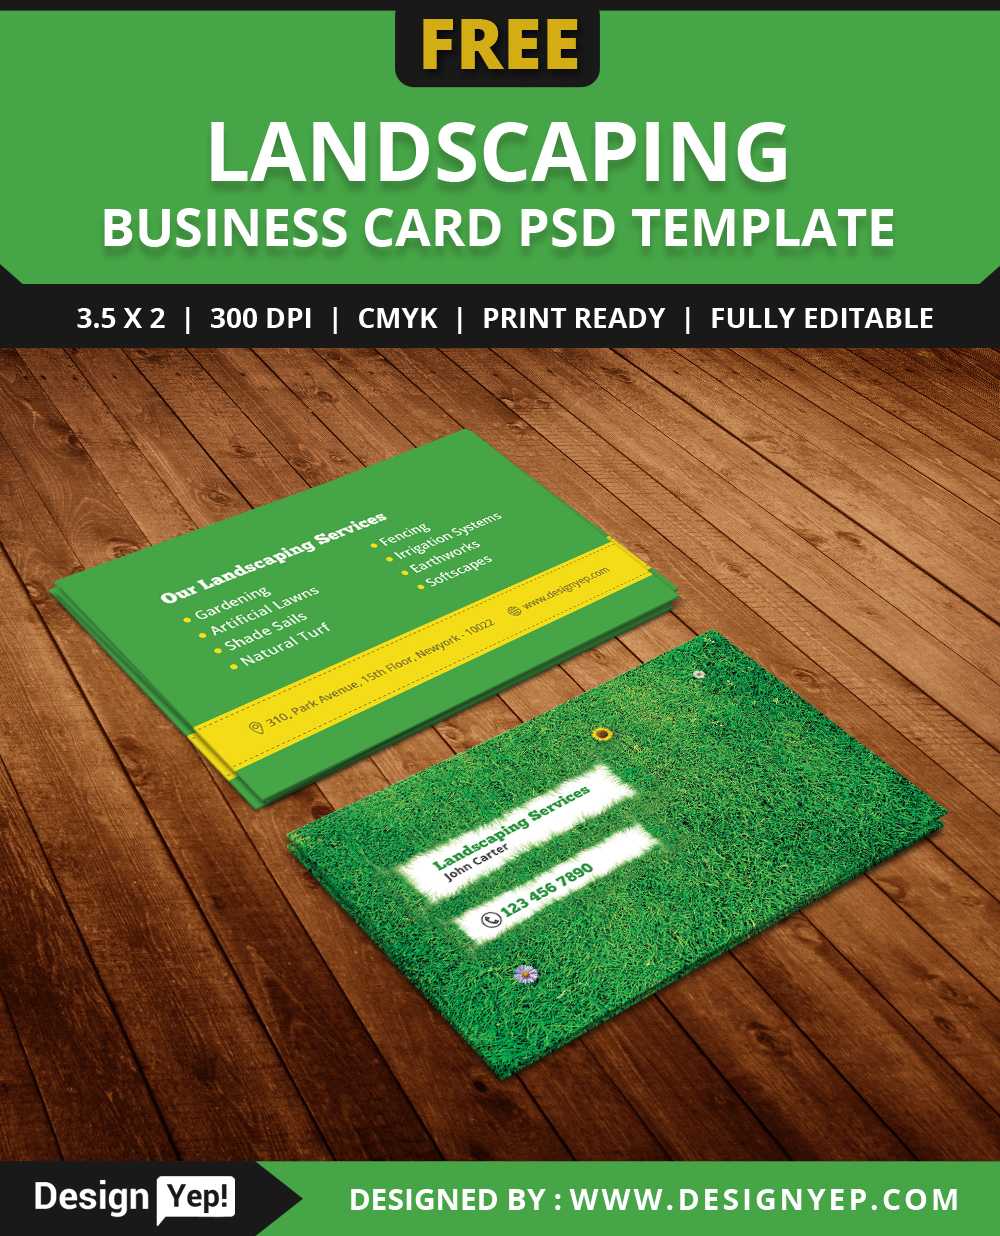 Free Landscaping Business Card Template Psd - Designyep Intended For Landscaping Business Card Template